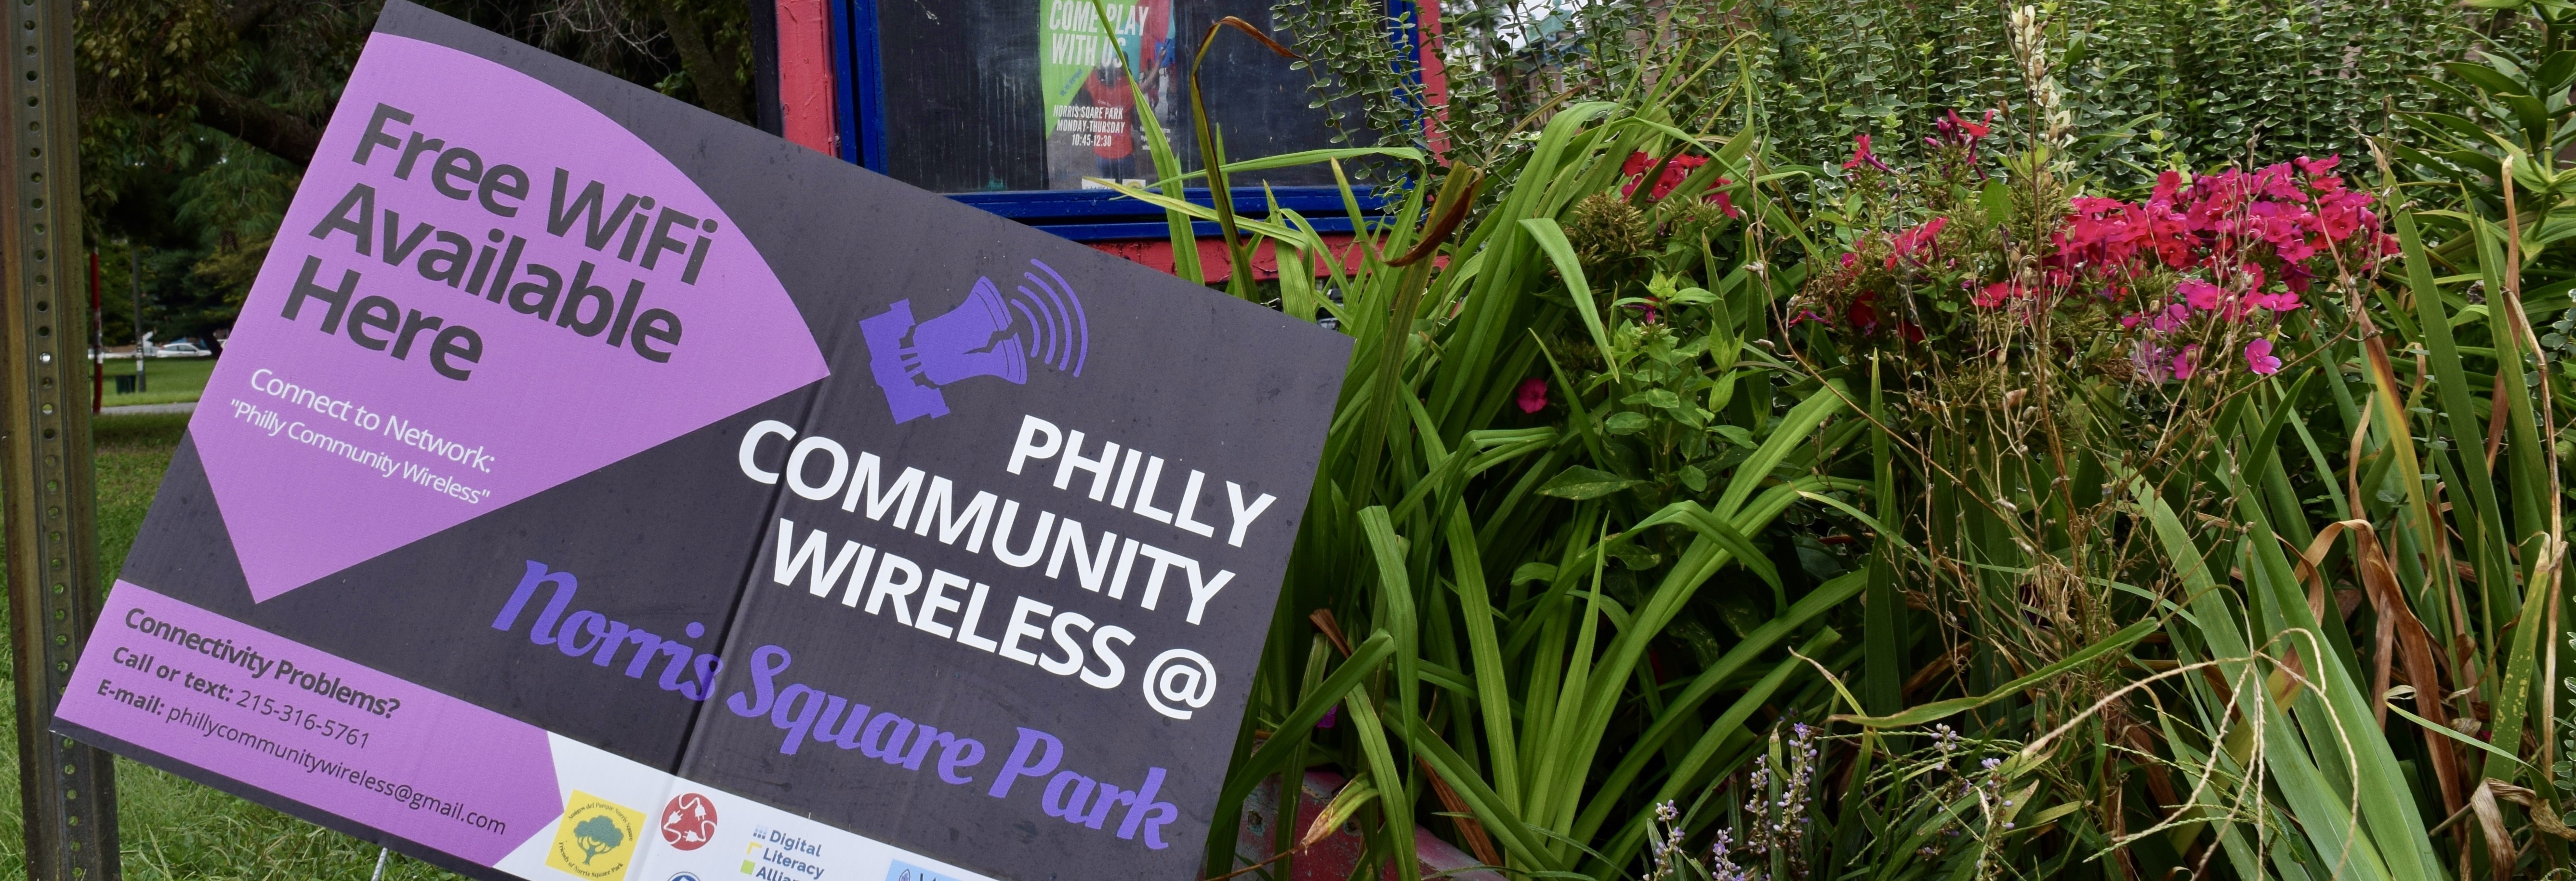 A Philly Community Wireless sign amongst some flowers in Norris Square Park